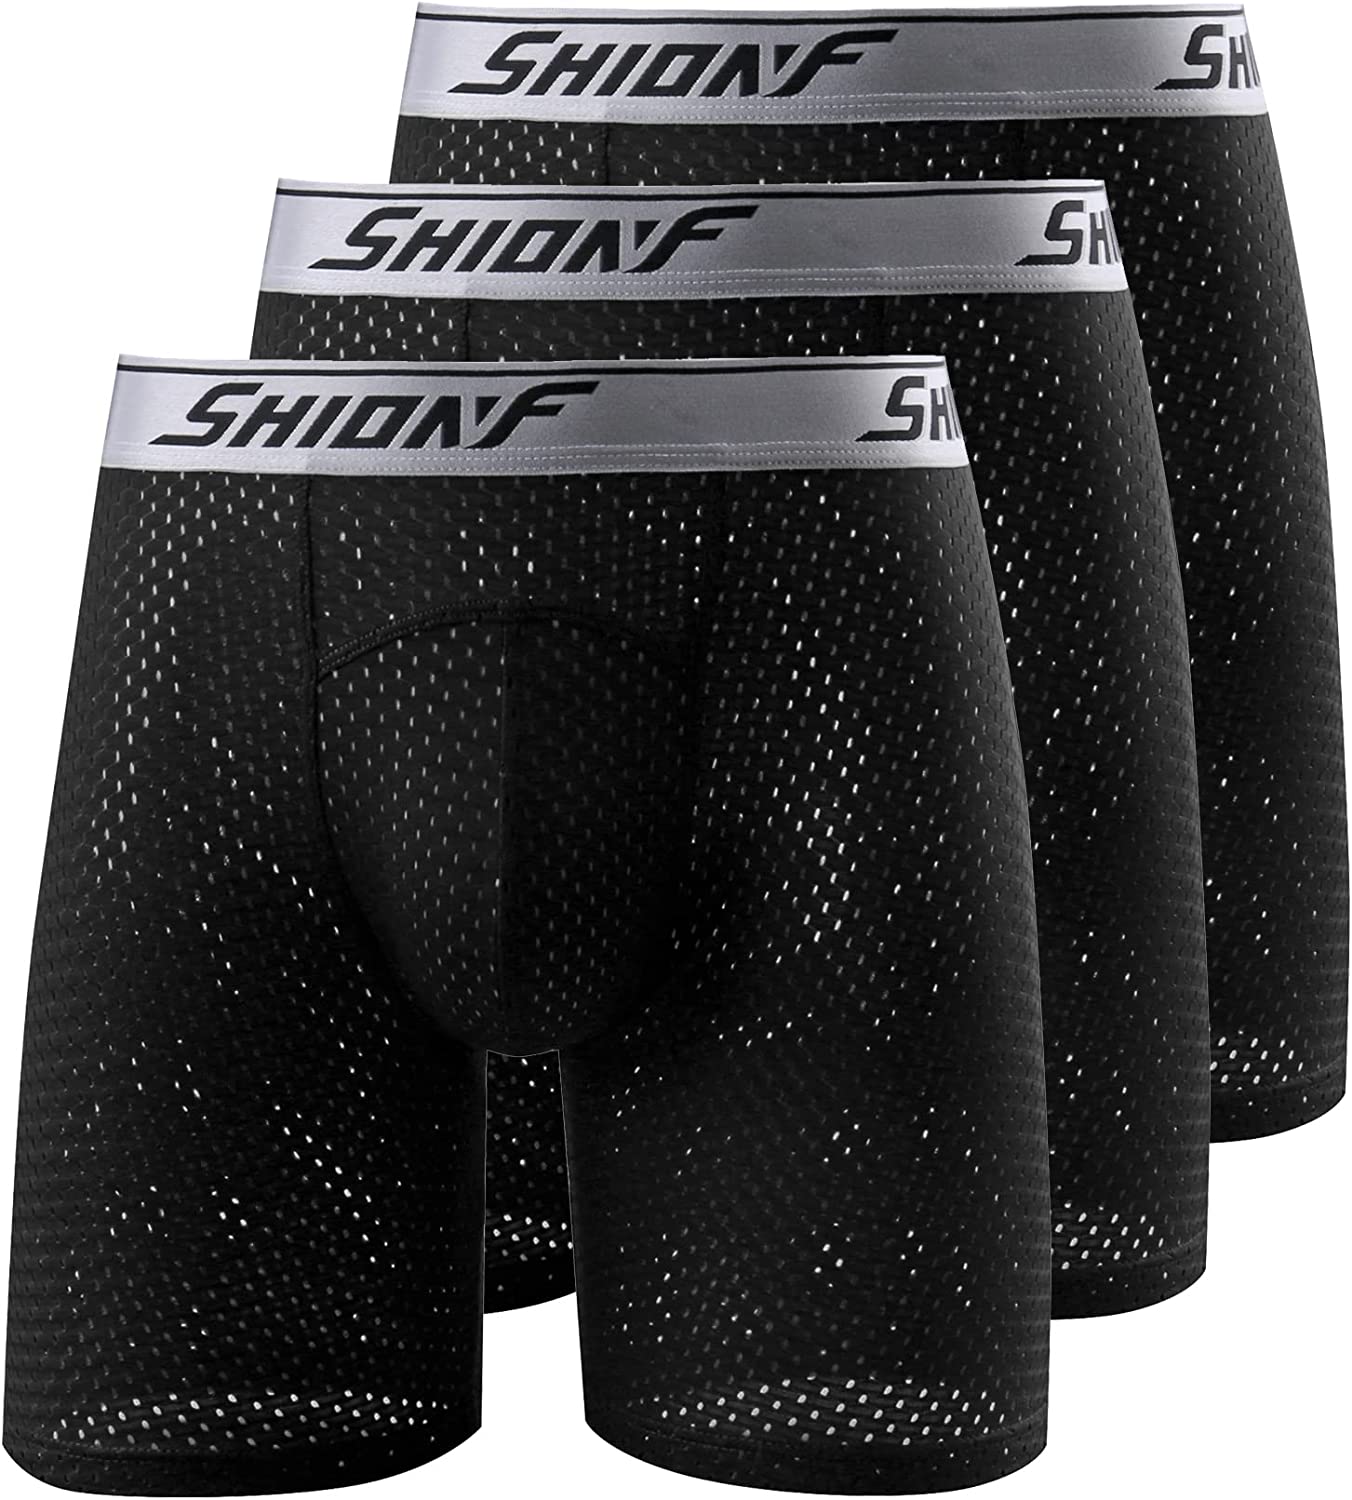 SHIONF Men's anti chafing Underwear Performance mesh cooling Boxer